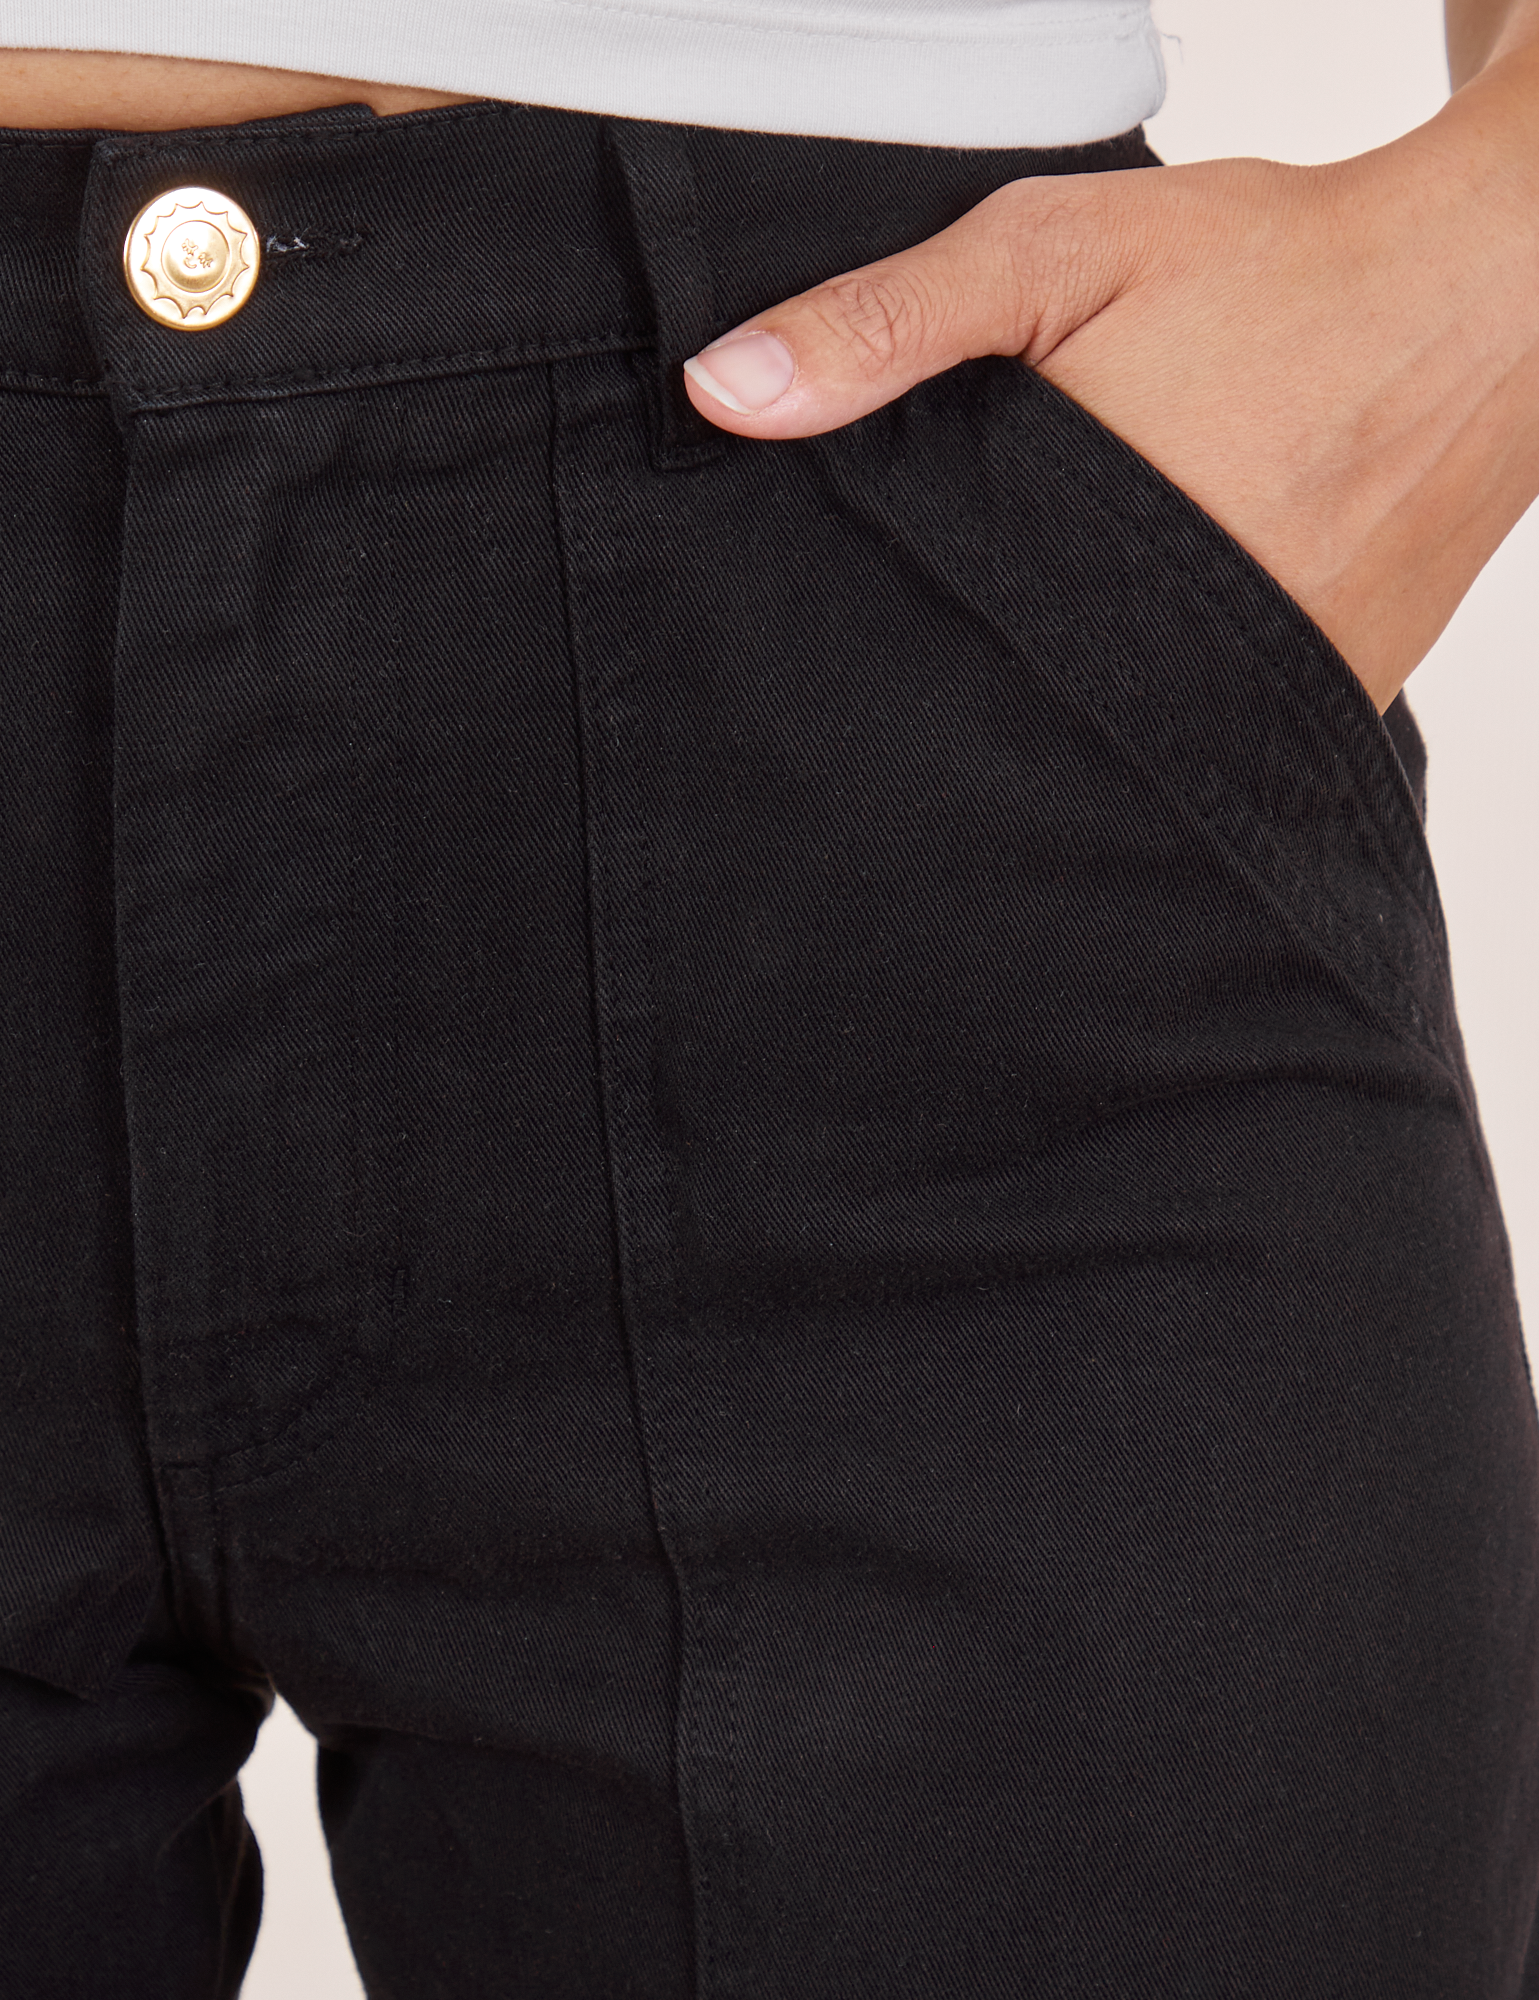 Pencil Pants in Basic Black front pocket close up. Alex has her hand in the pocket.